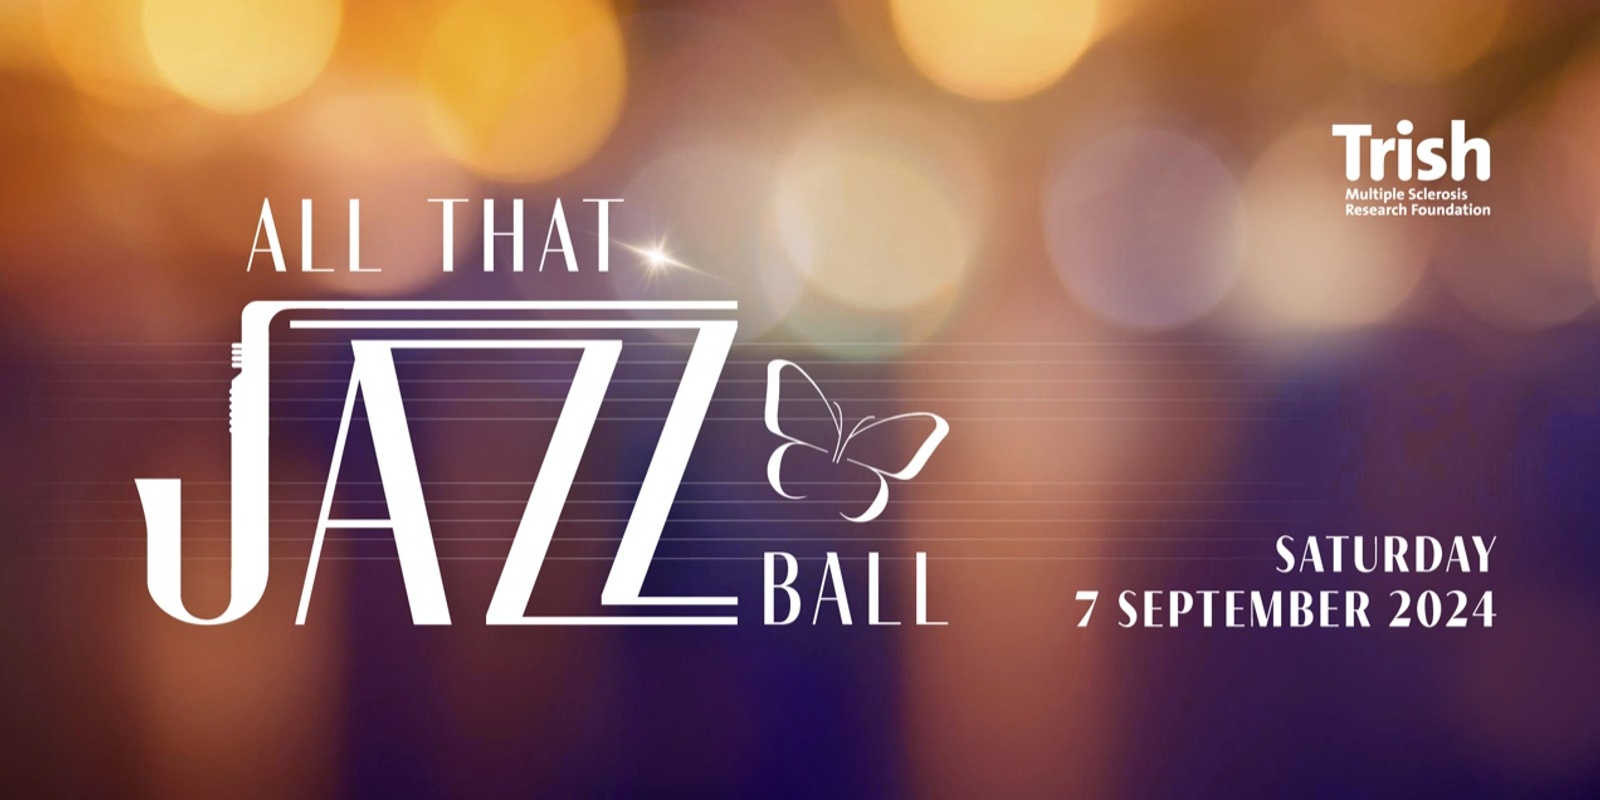 Banner image for Trish MS All That Jazz Ball